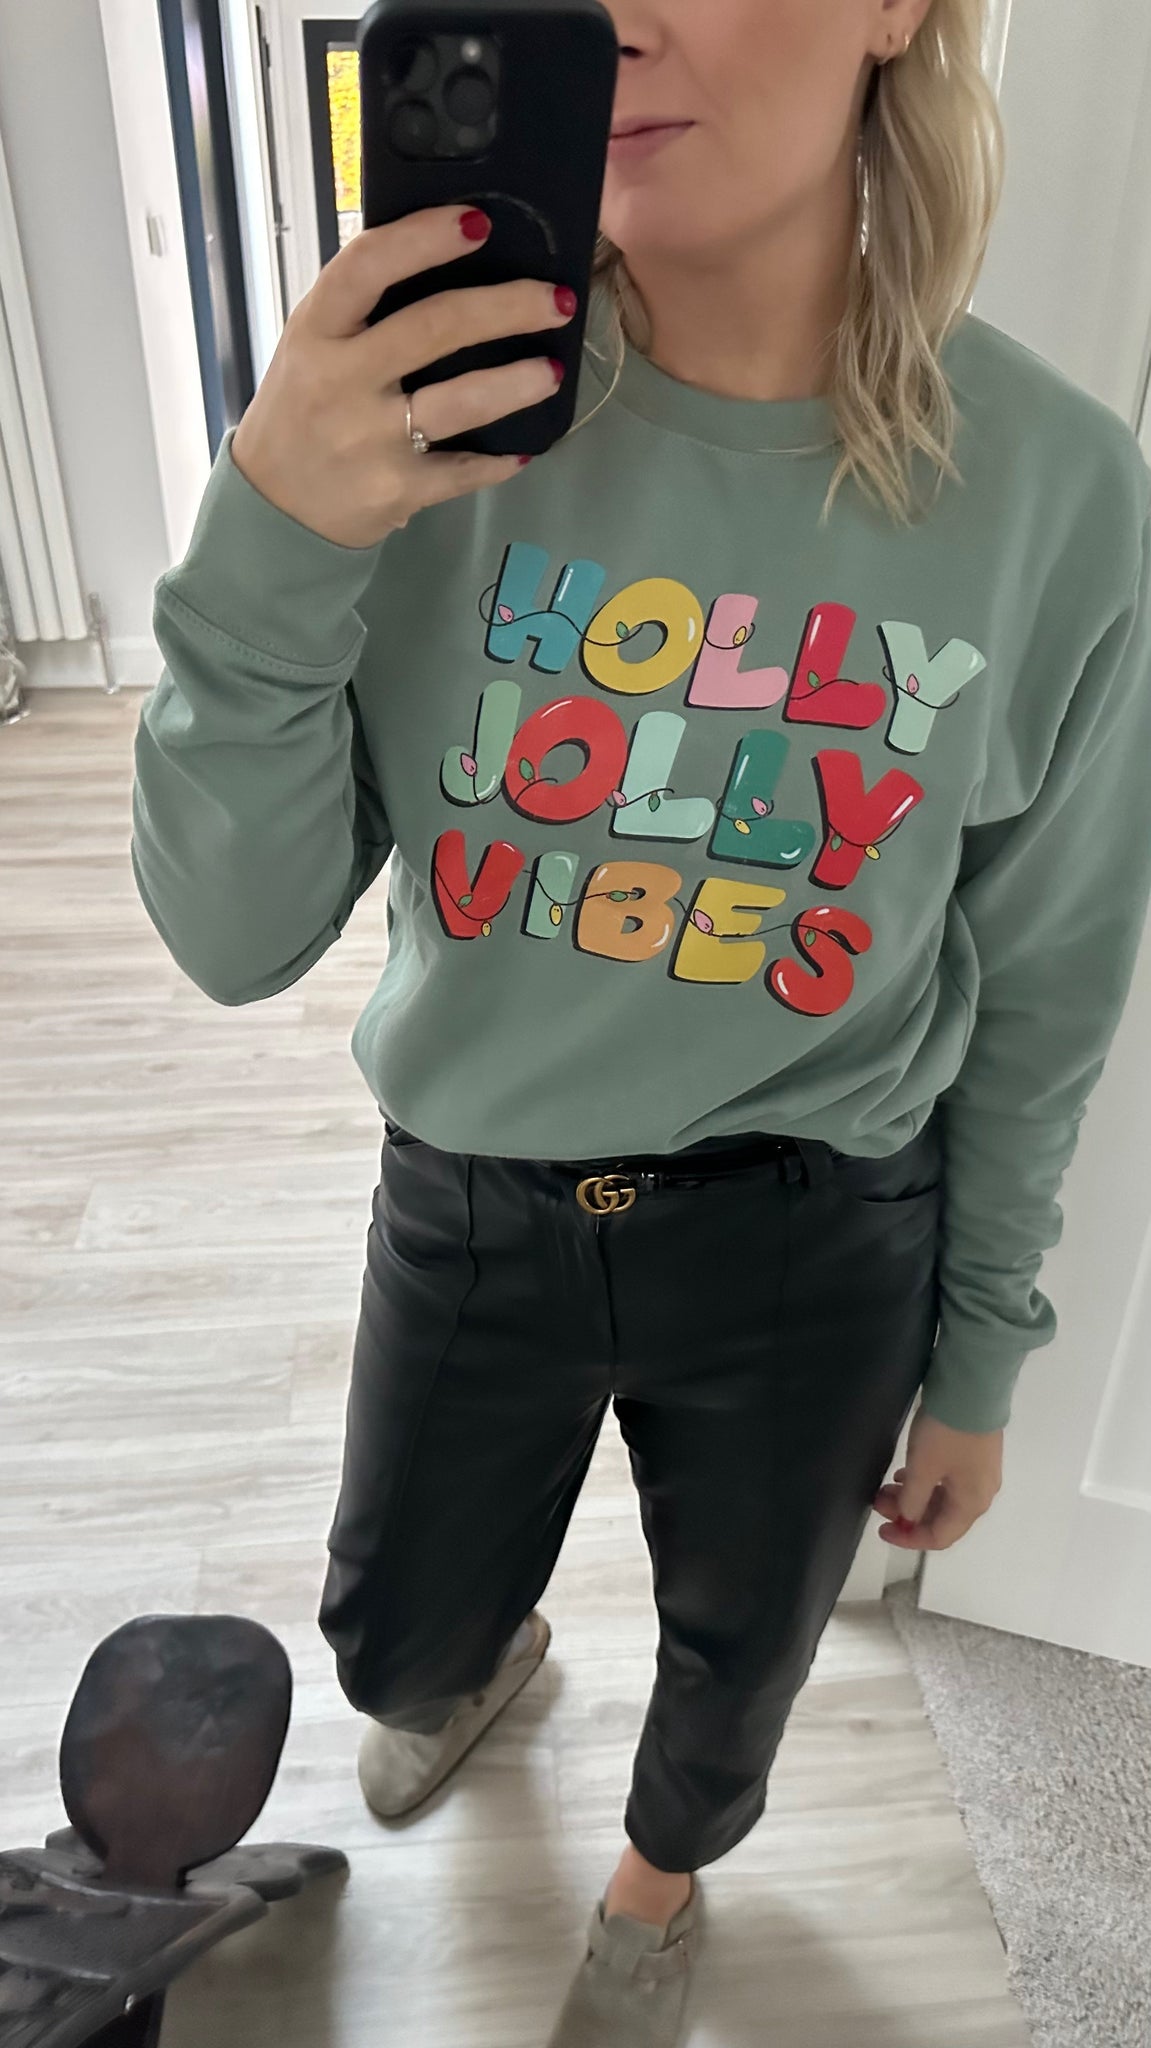 SAMPLE SALE Holly Jolly Vibes Christmas Jumper Size Adults S